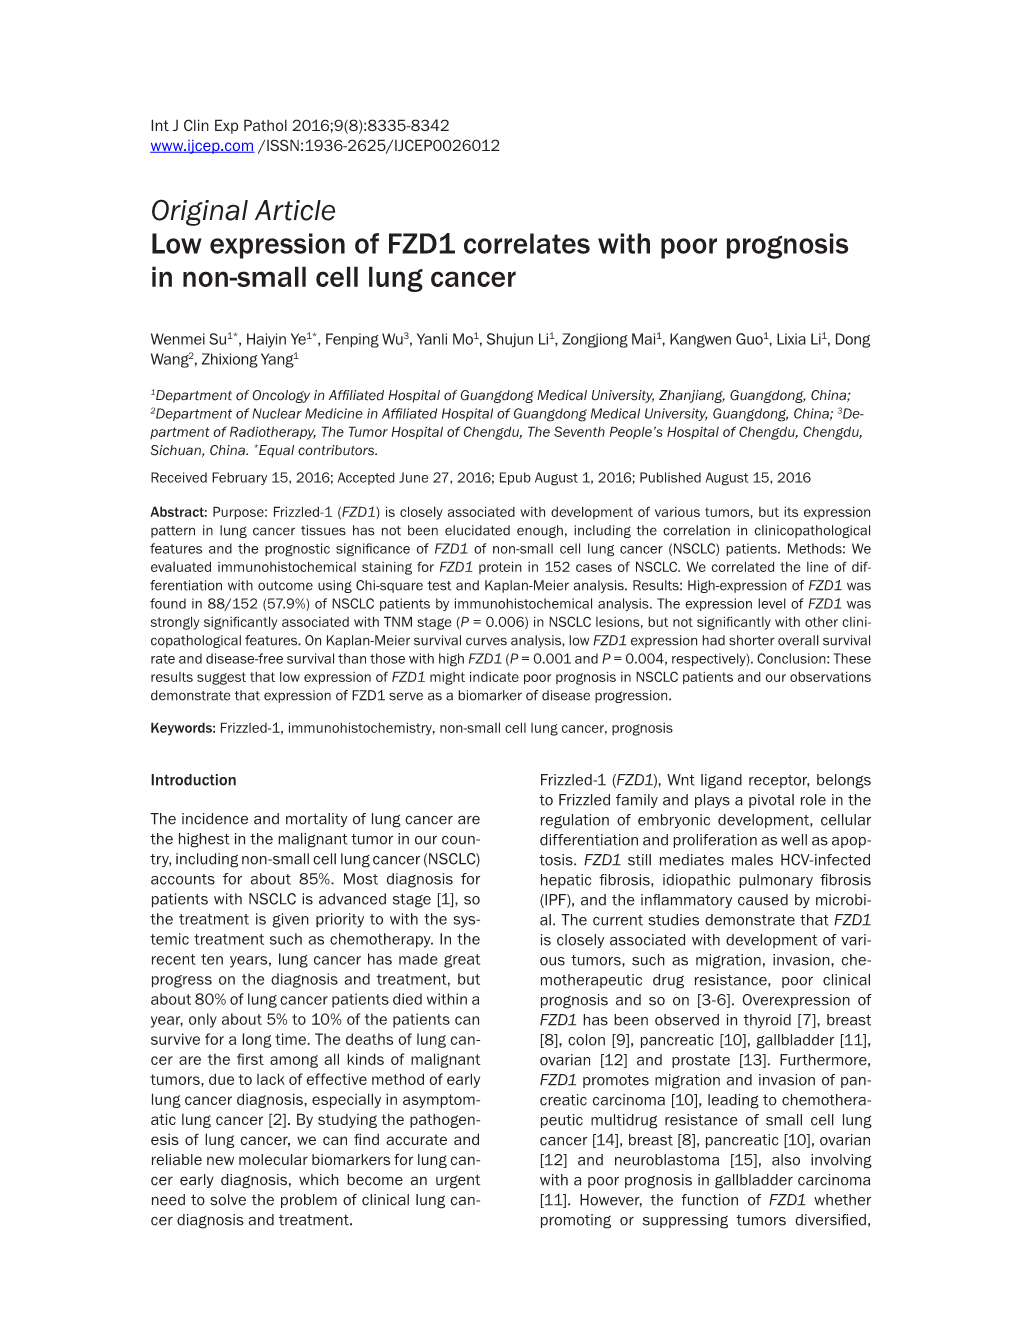 Original Article Low Expression of FZD1 Correlates with Poor Prognosis in Non-Small Cell Lung Cancer